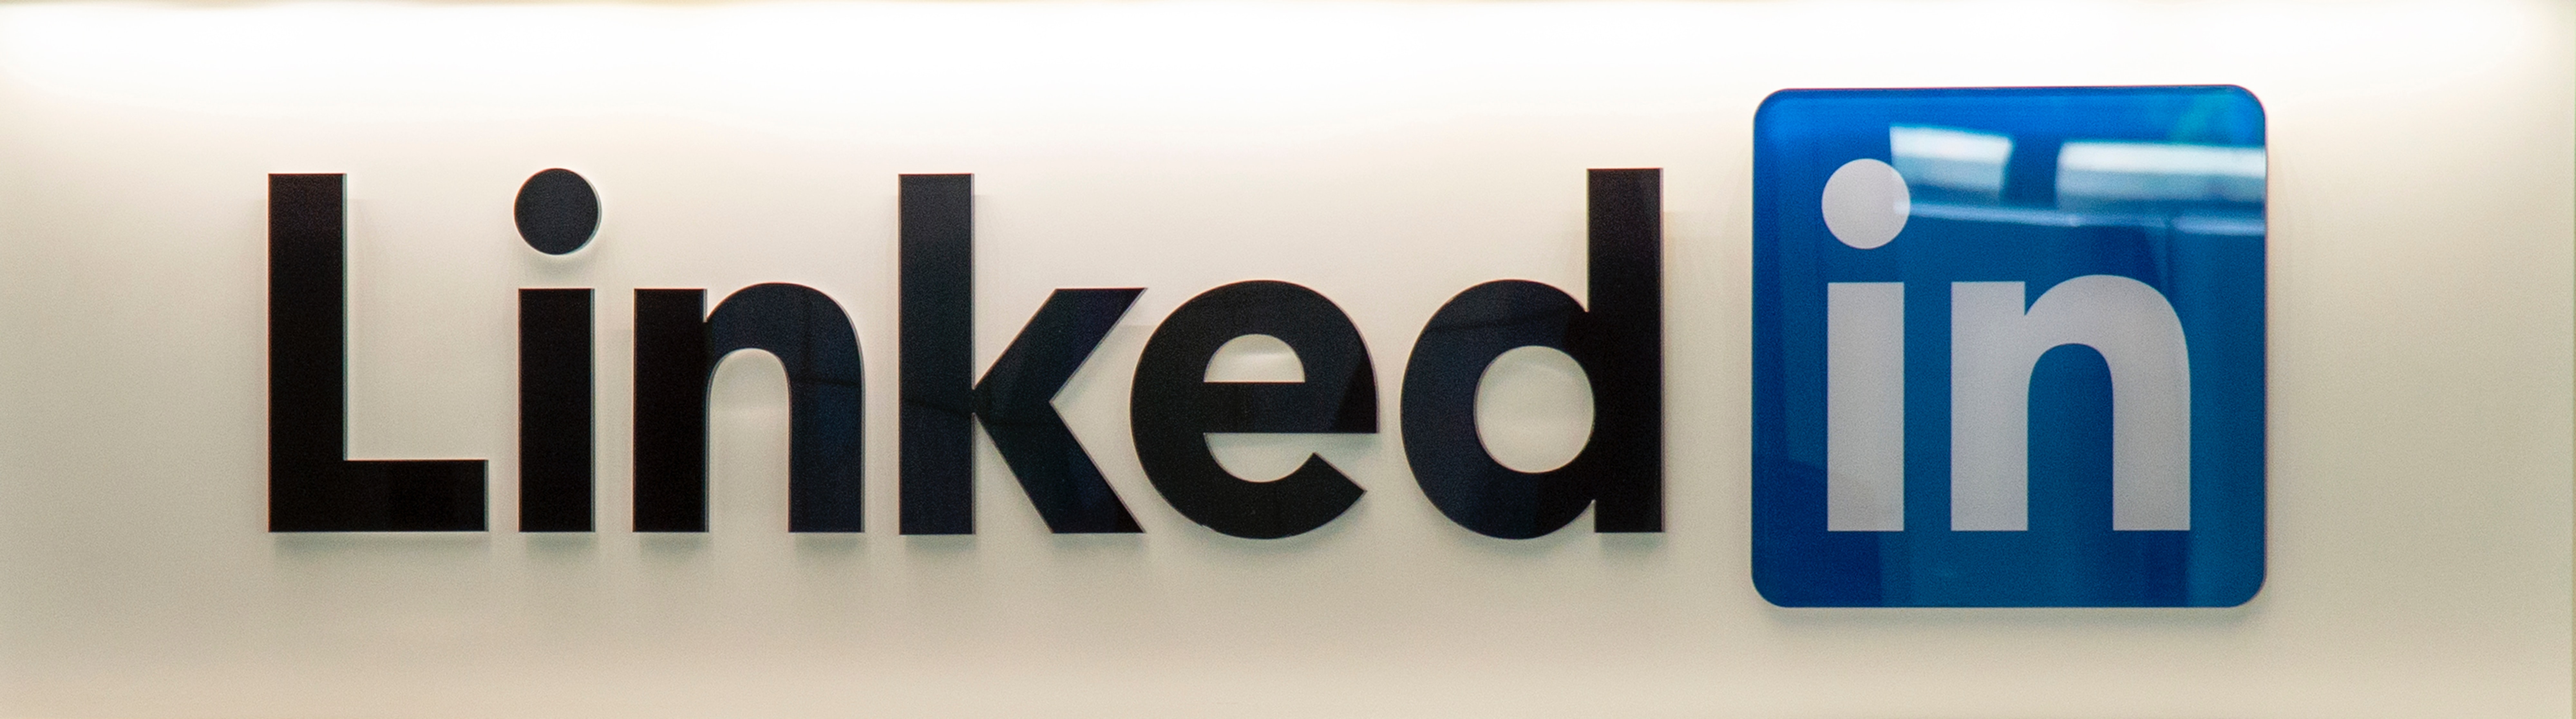 How to generate leads on LinkedIn for your Career and Business by Adam Berguem